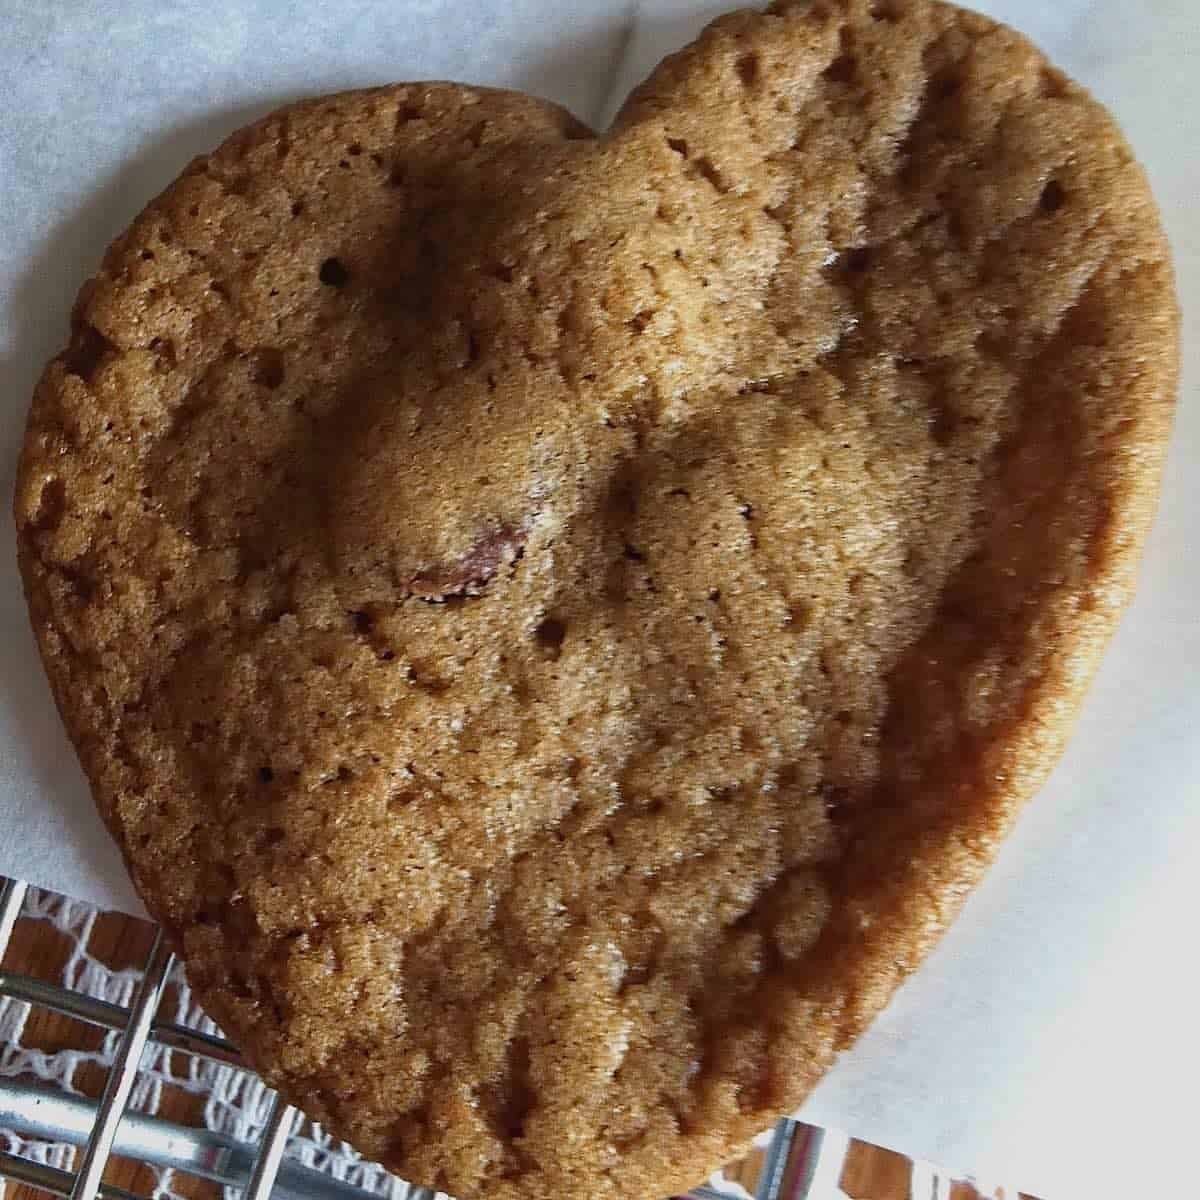 Your favorite recipe is a heart shaped chocolate chip cookie.